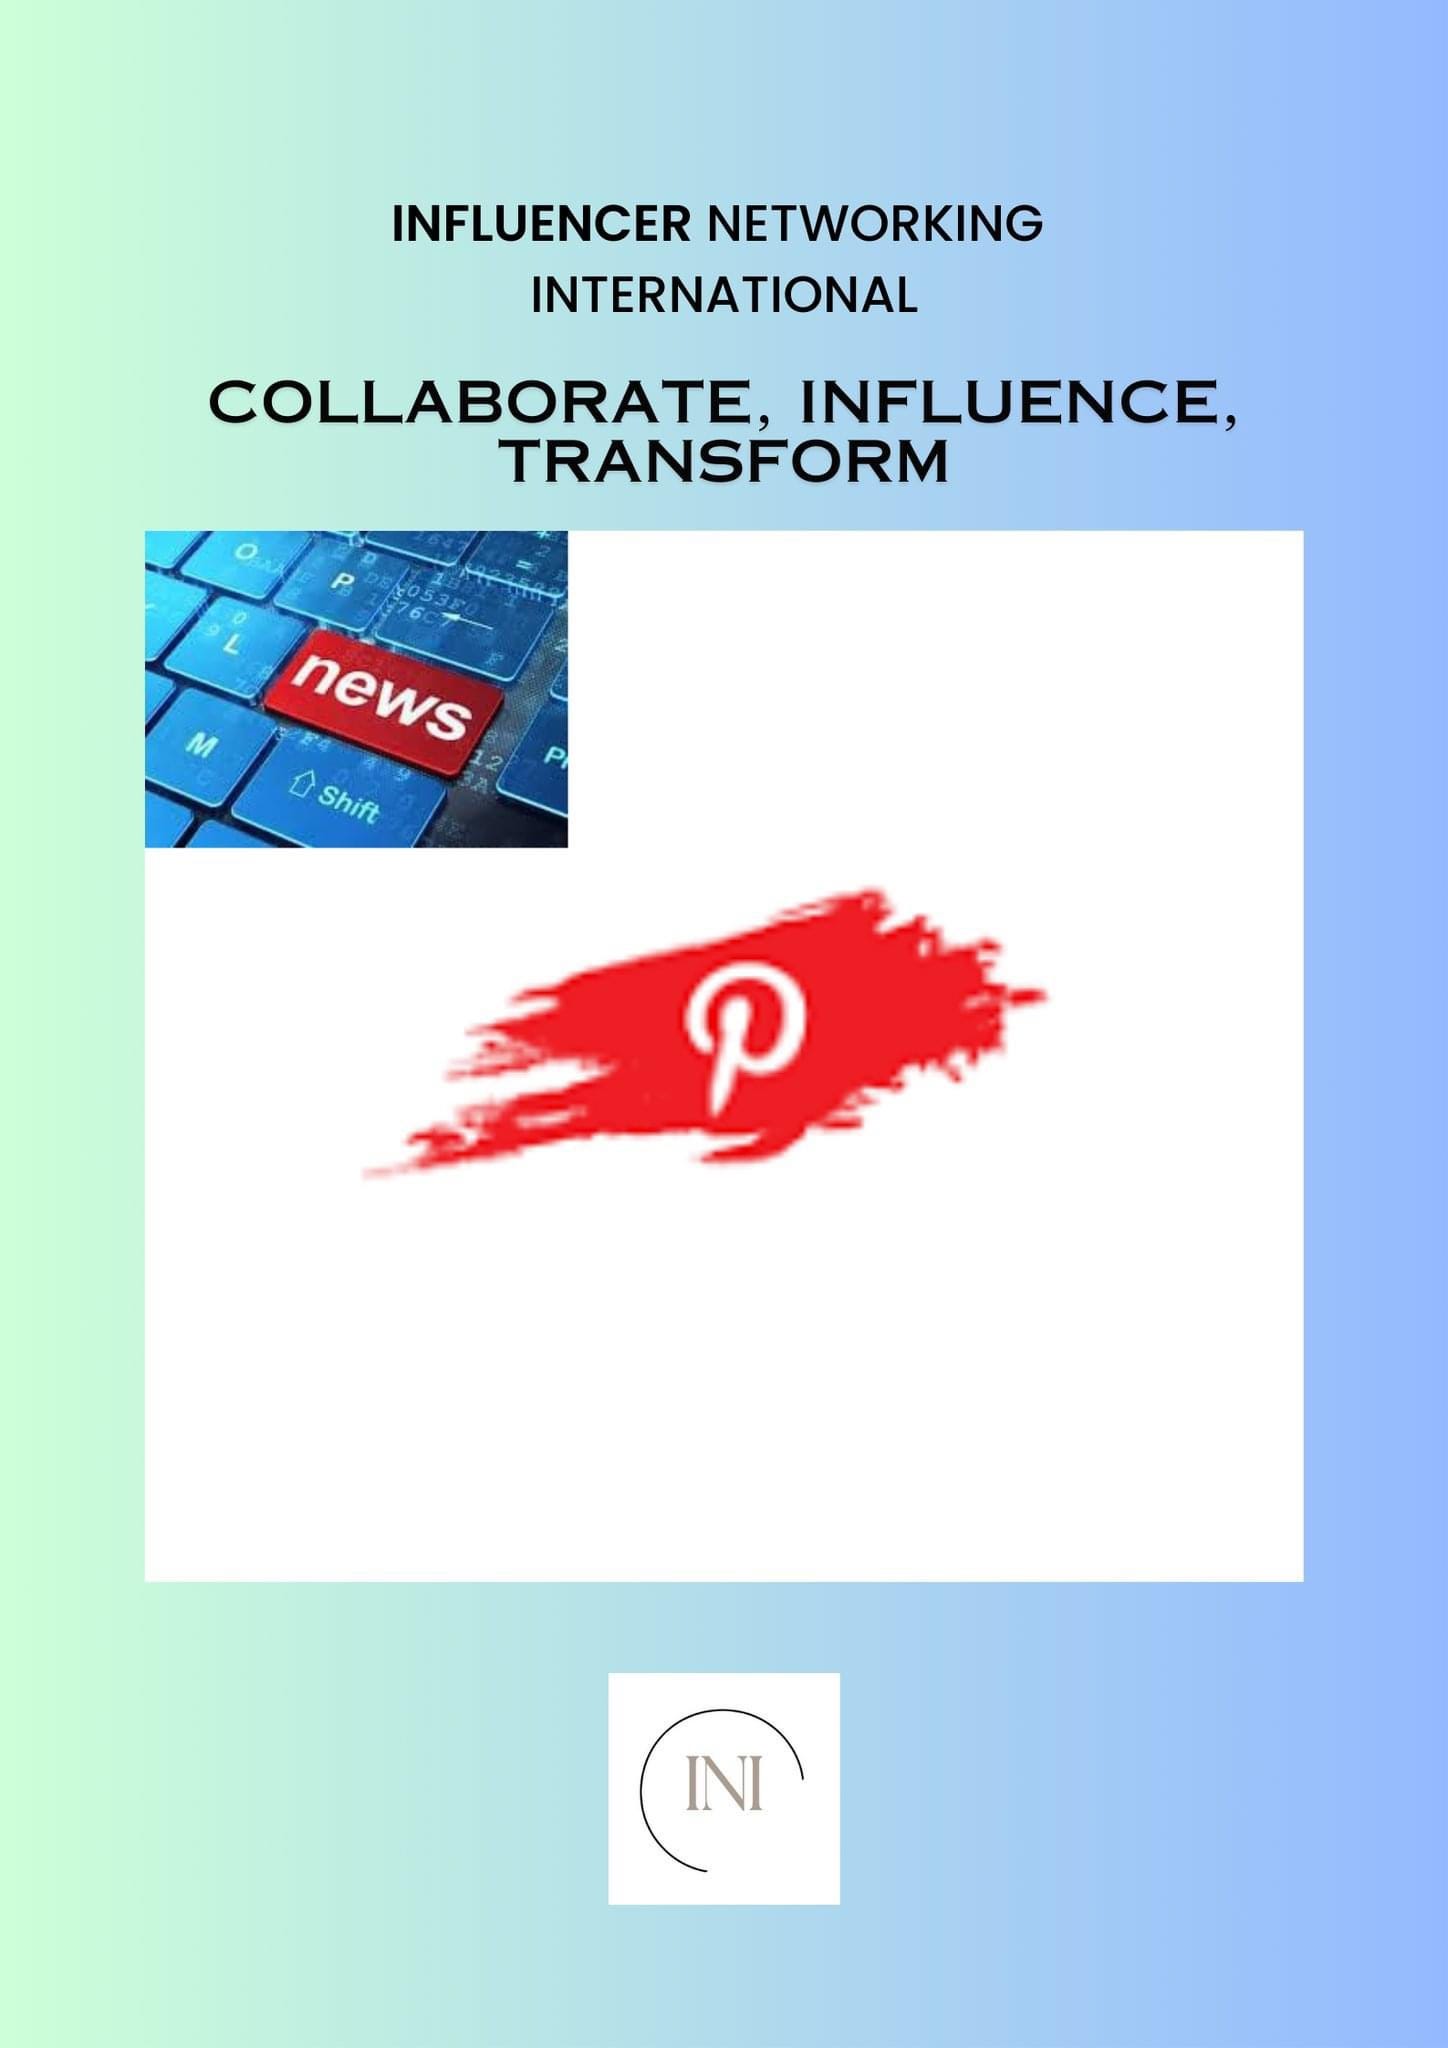 Pinterest has launched a new account type, “Agency”.